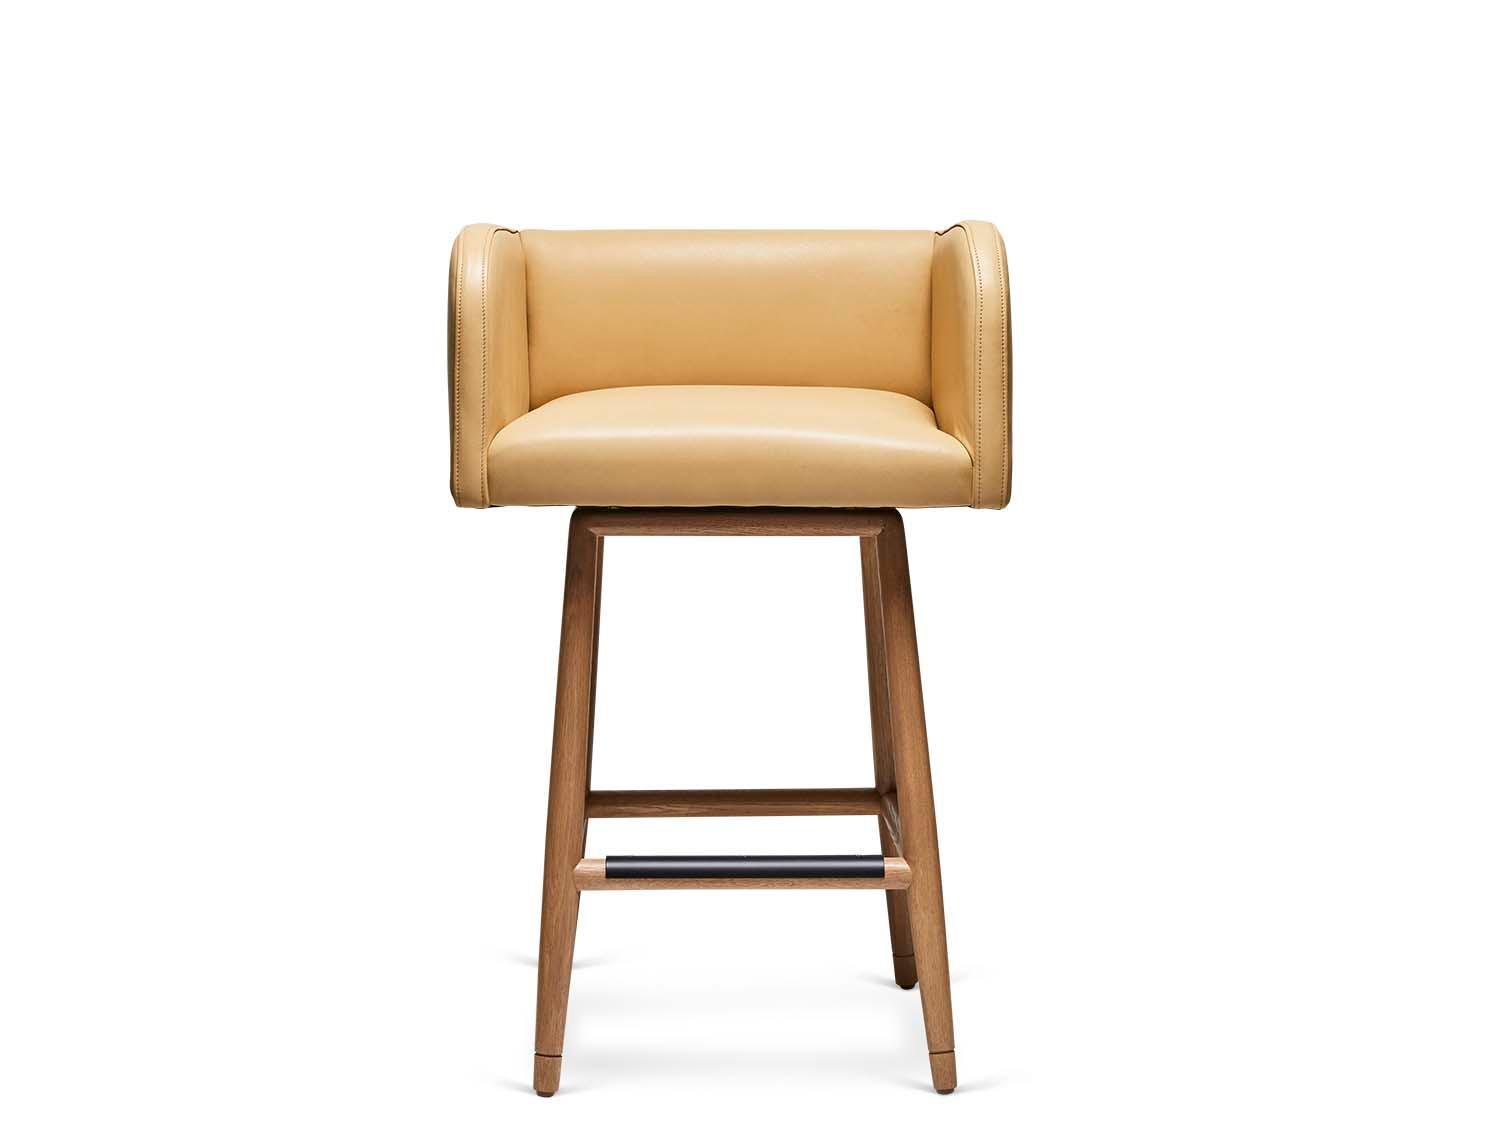 The Moreno Barstool with swivel sits low with Italian inspired arms and incised details on a solid walnut or oak base. Available to order in counter height. 

The Lawson-Fenning Collection is designed and handmade in Los Angeles,